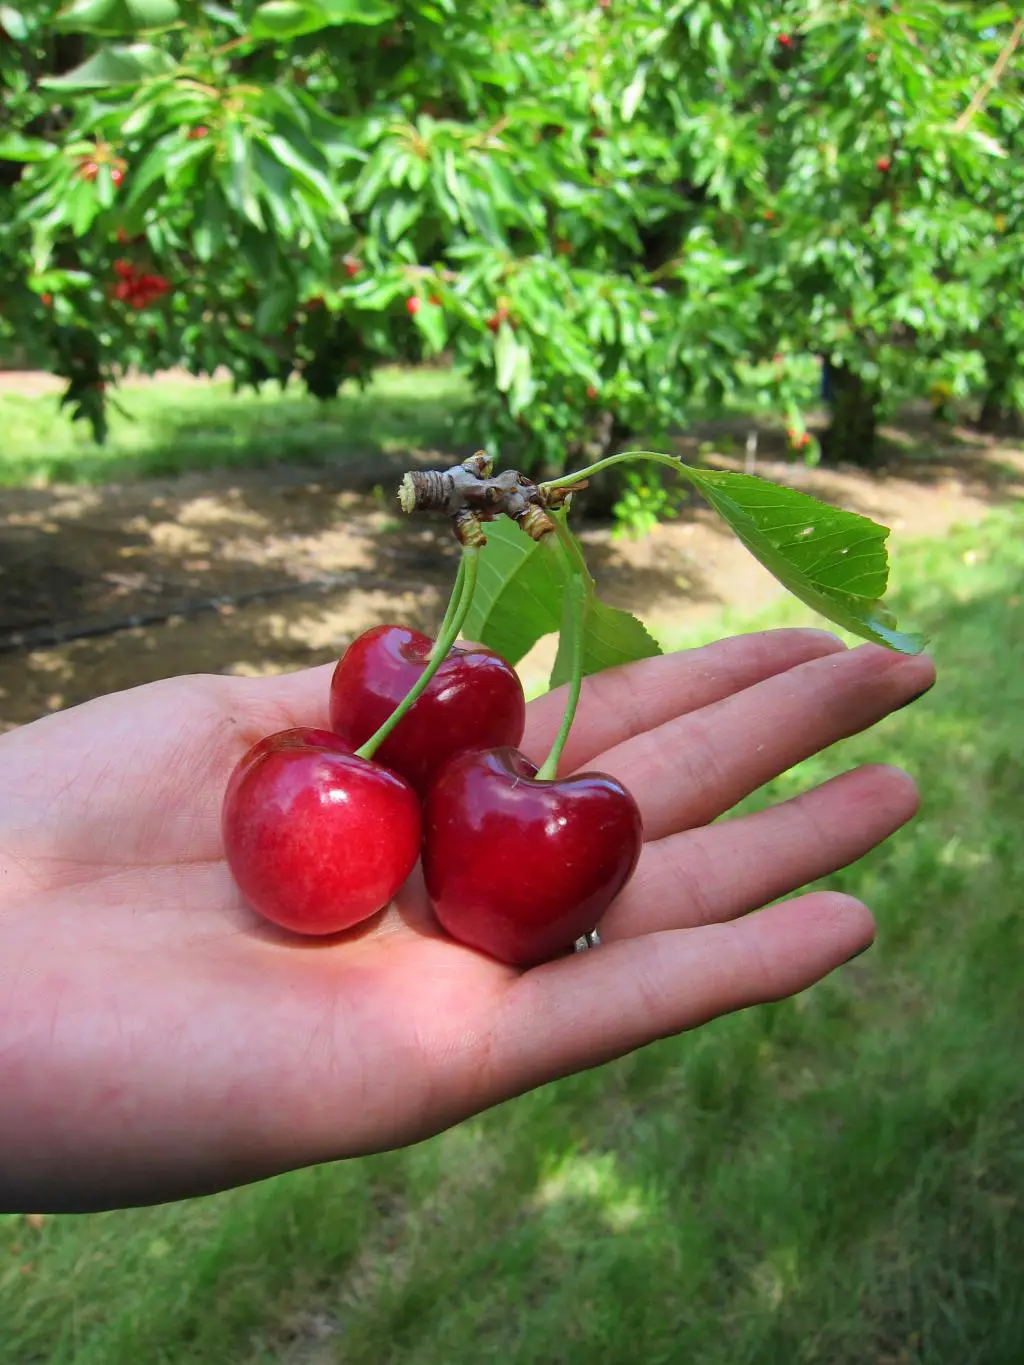 Three fresh cherries on the palm of the hand at one of the cherry picking farms in Brentwood, California